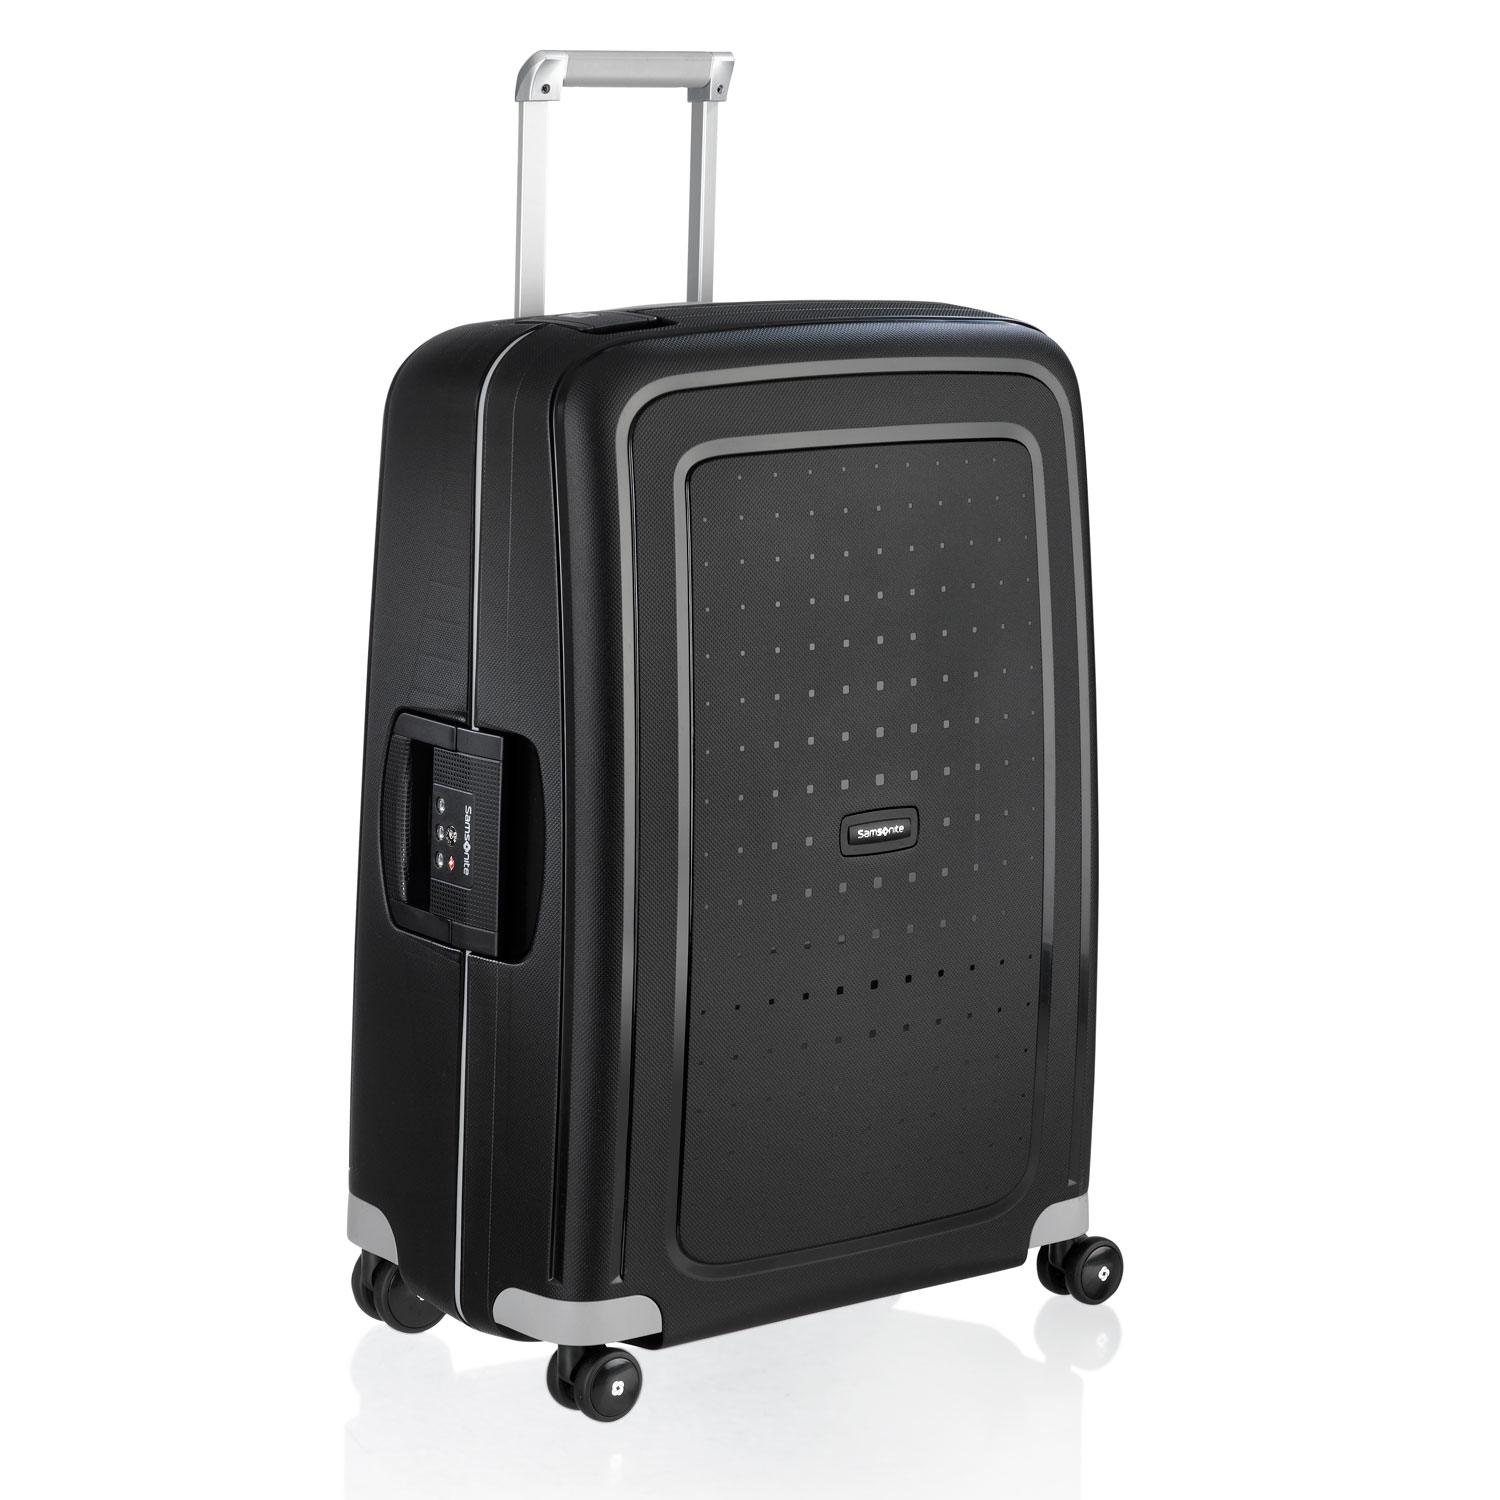 Can Samsonite Suitcases Nest Inside Each Other? - Luggage Unpacked